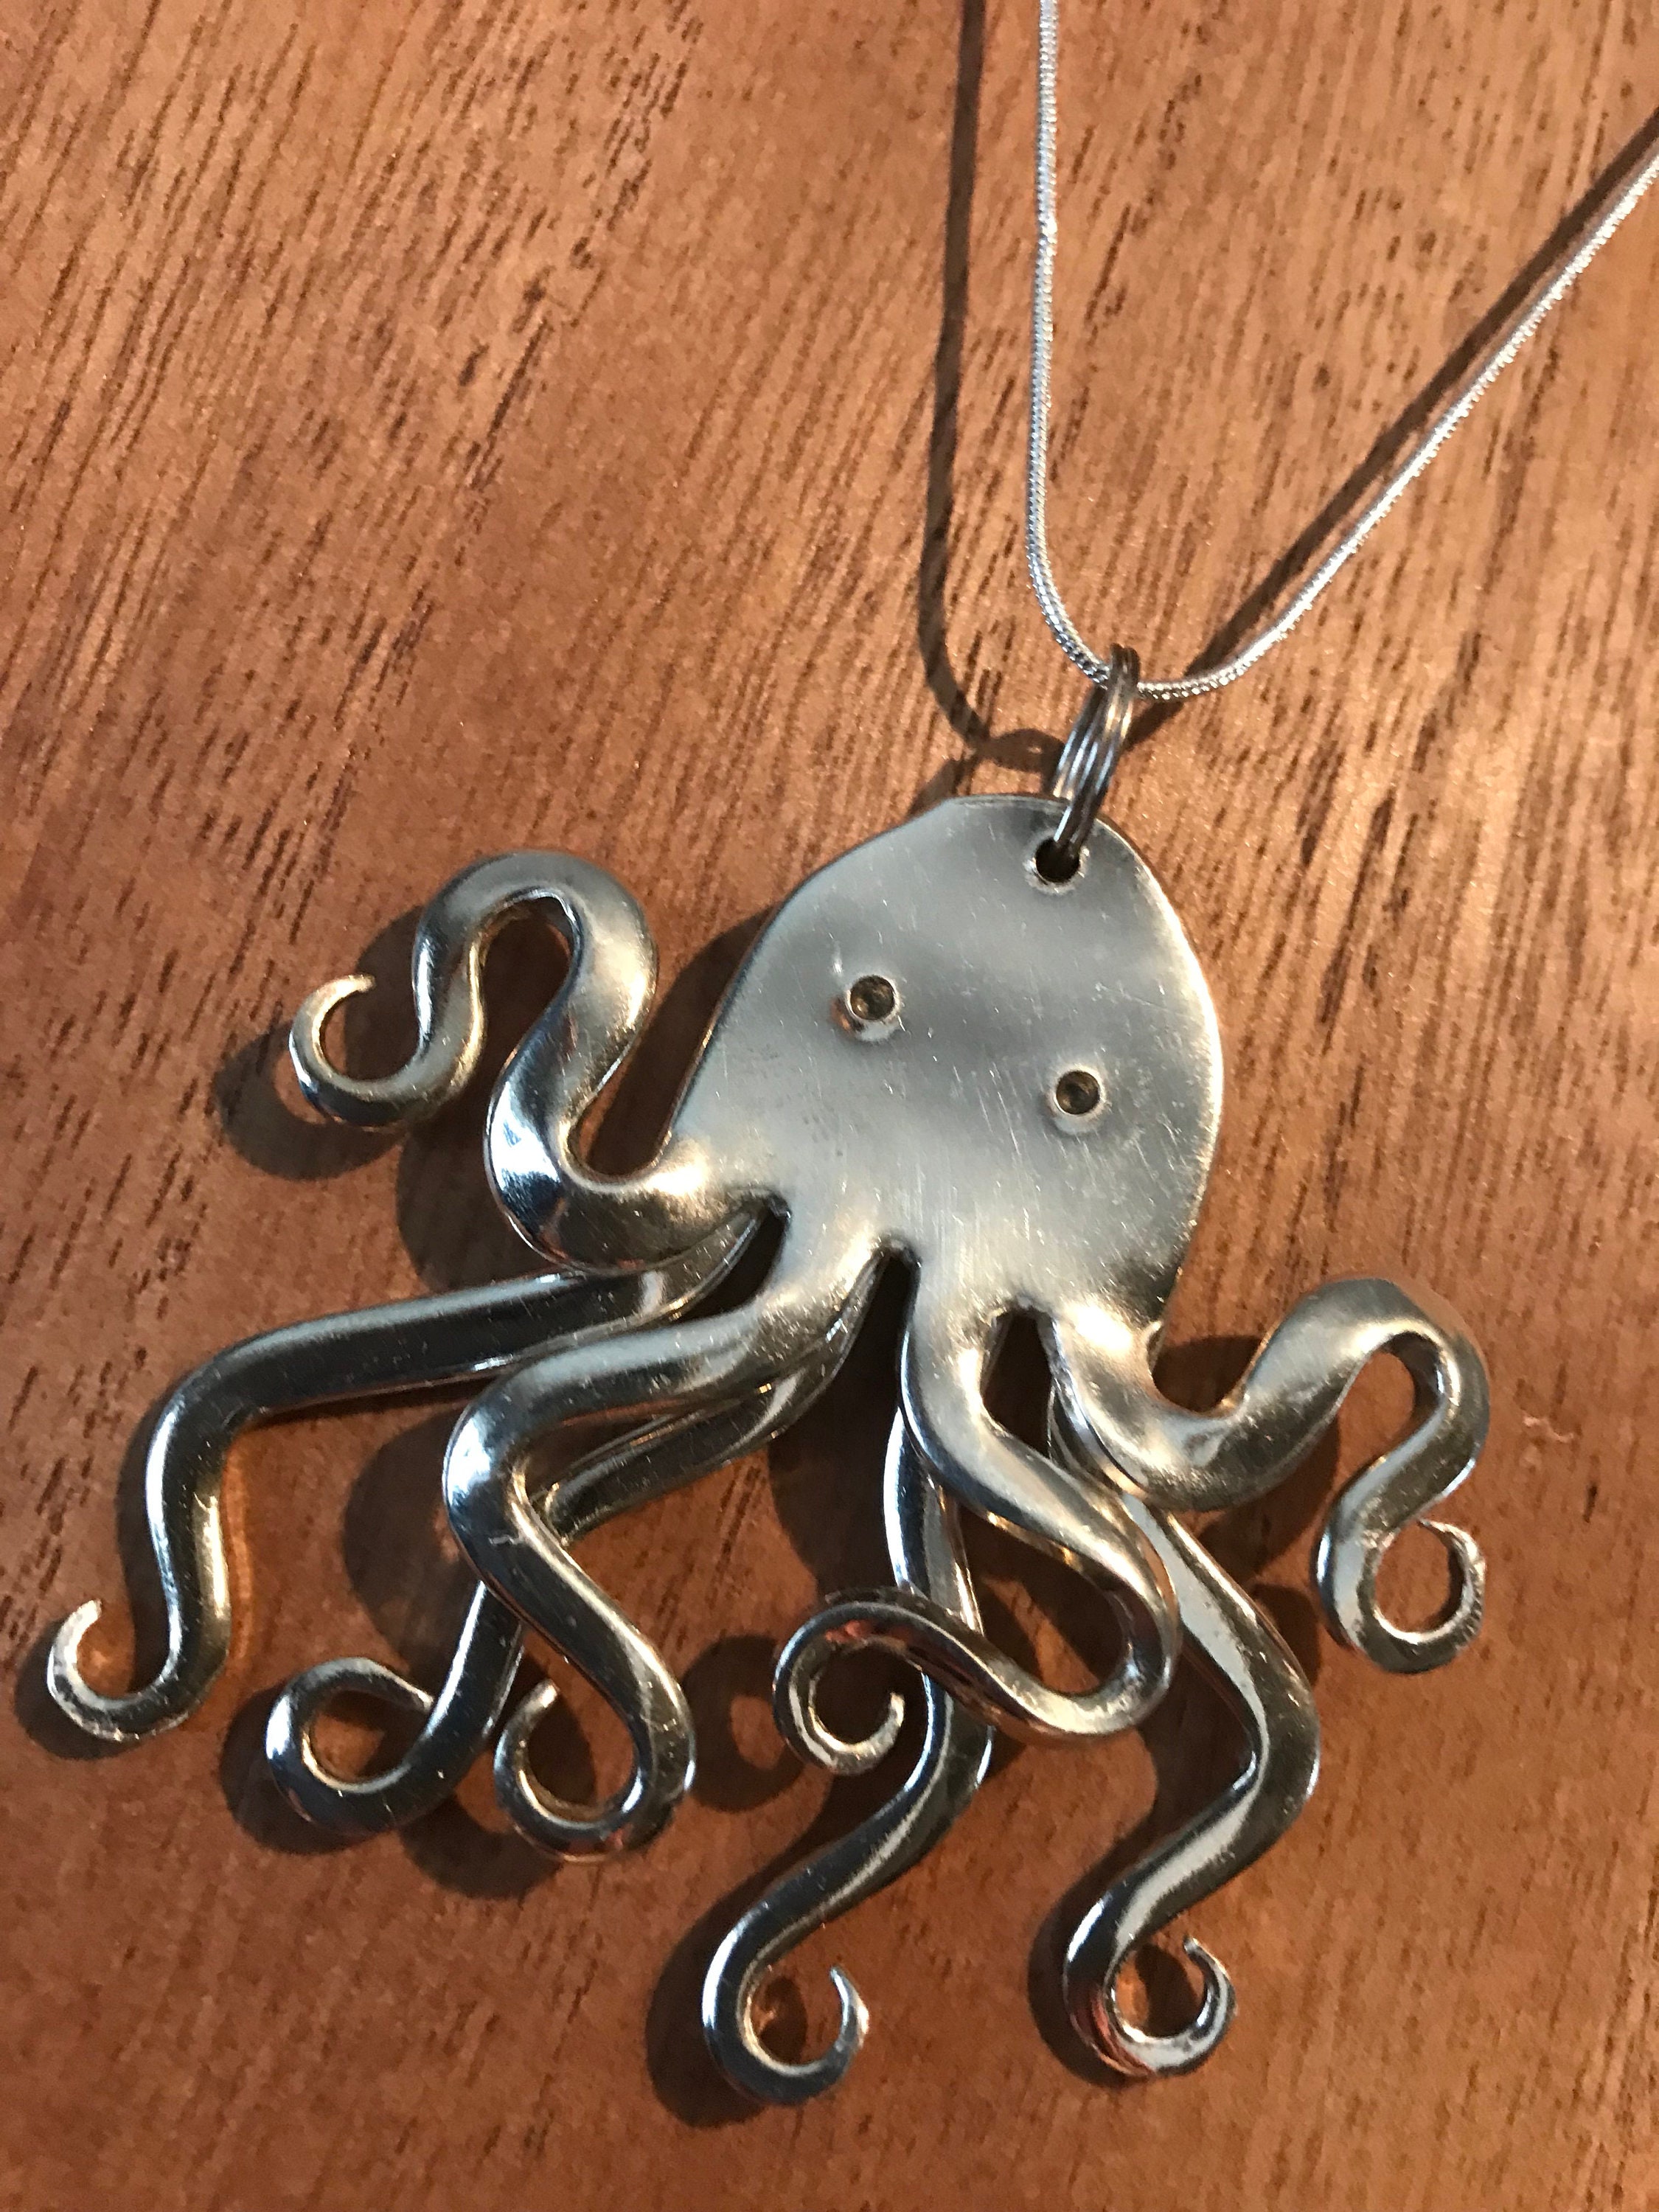 Octopus Necklace, Otto, Silverware jewelery, Fork Necklace,Fork Jewelry  Vintage Silverware Necklace, Upcycled Cutlery jewelry, Dancing